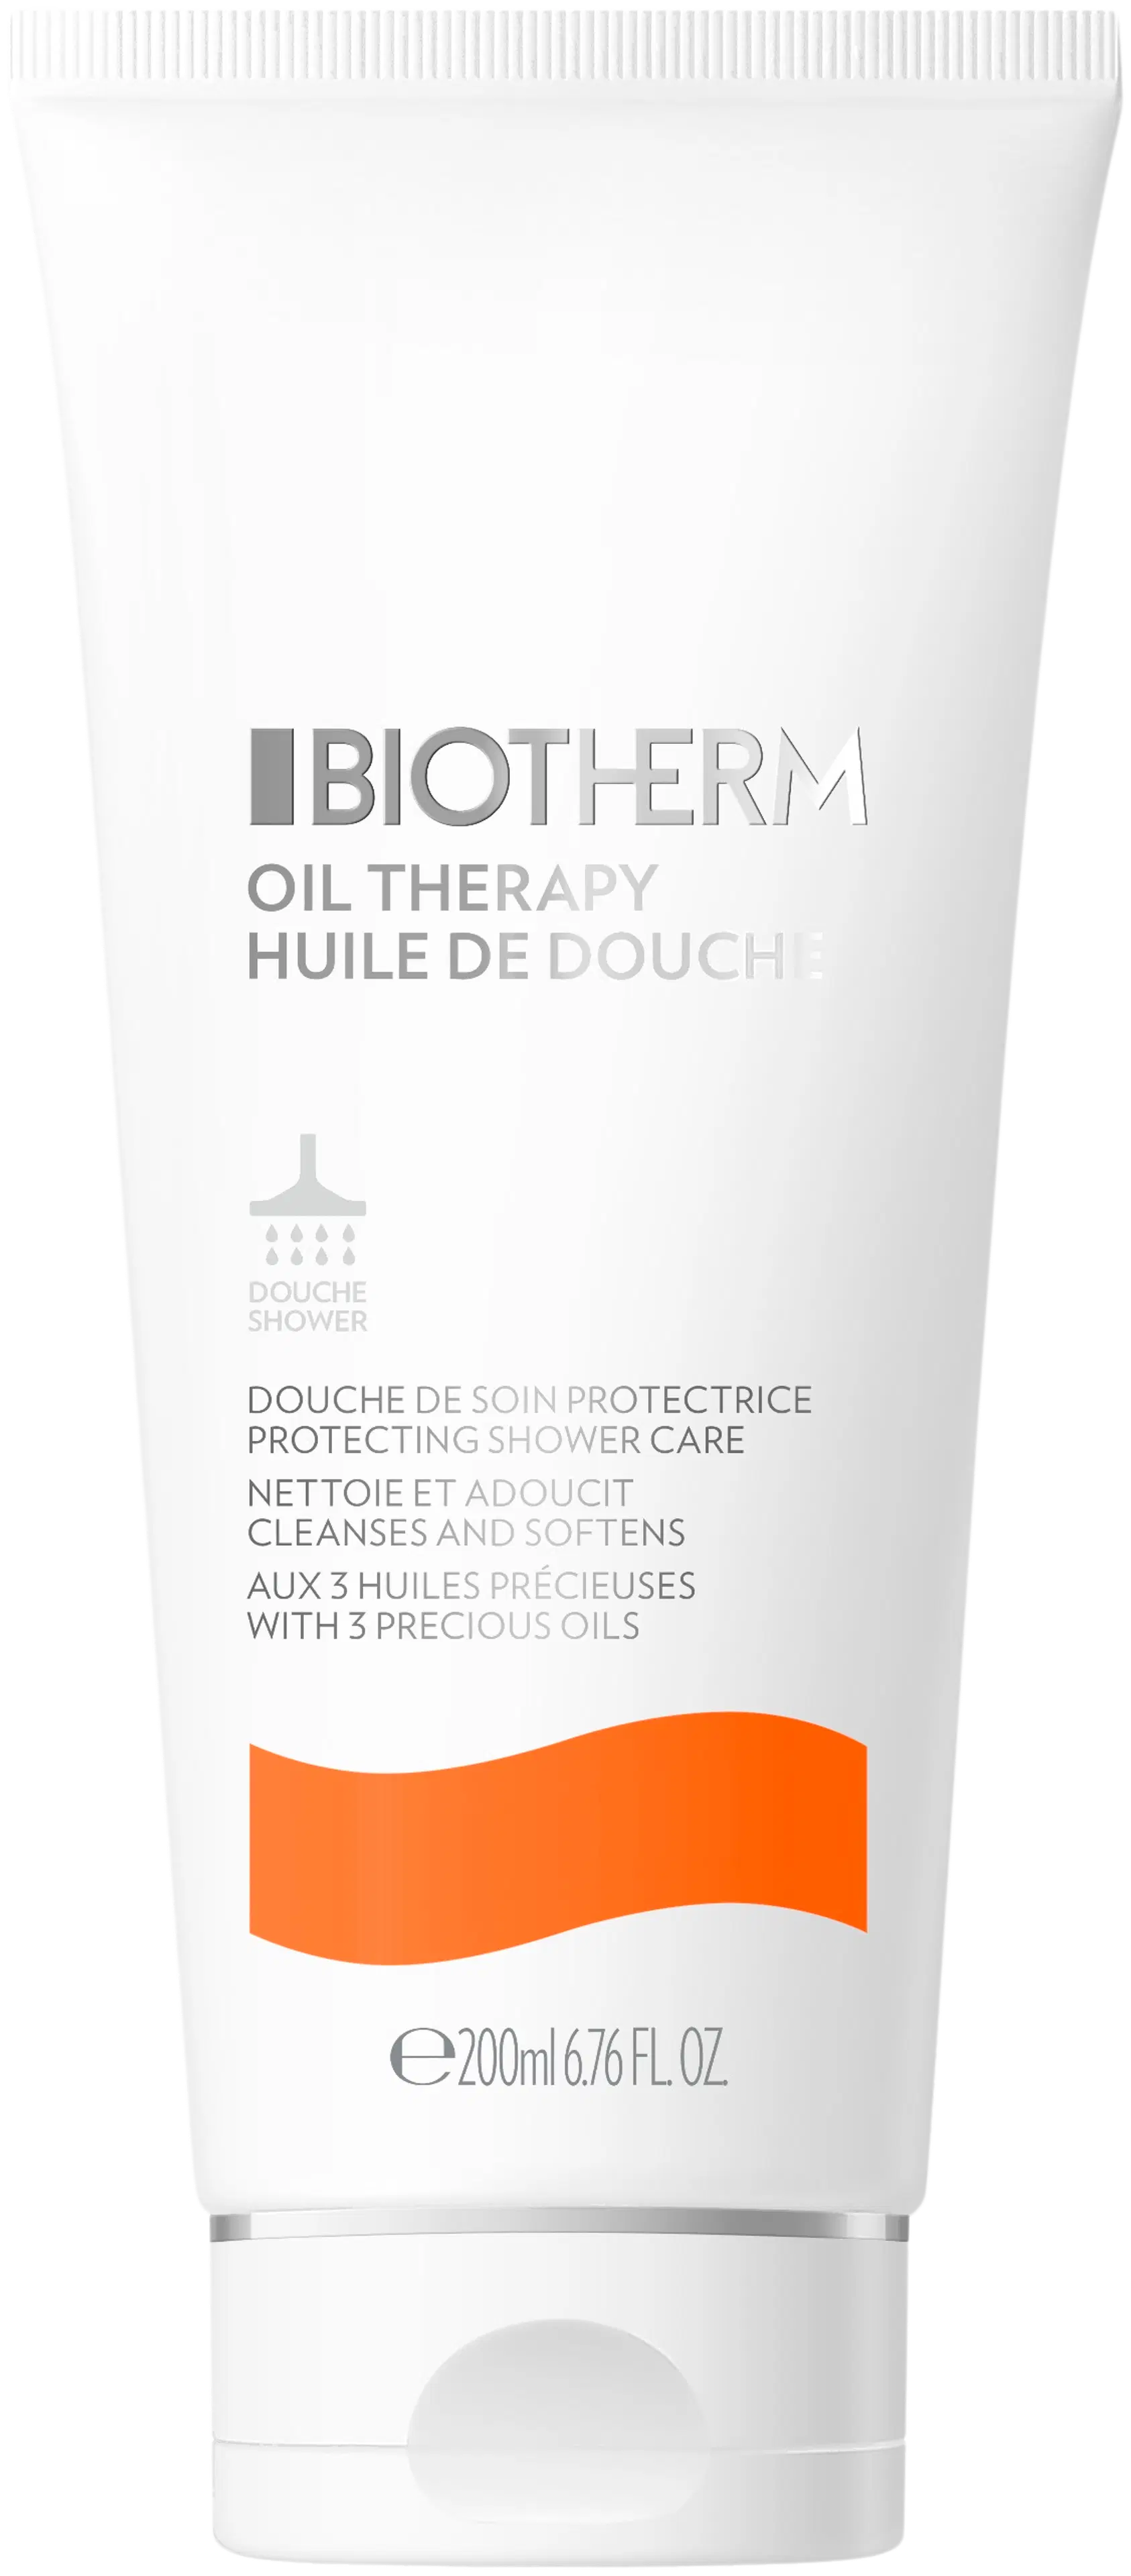 Biotherm Oil Therapy Baume Corps Shower Gel suihkuöljy 200 ml